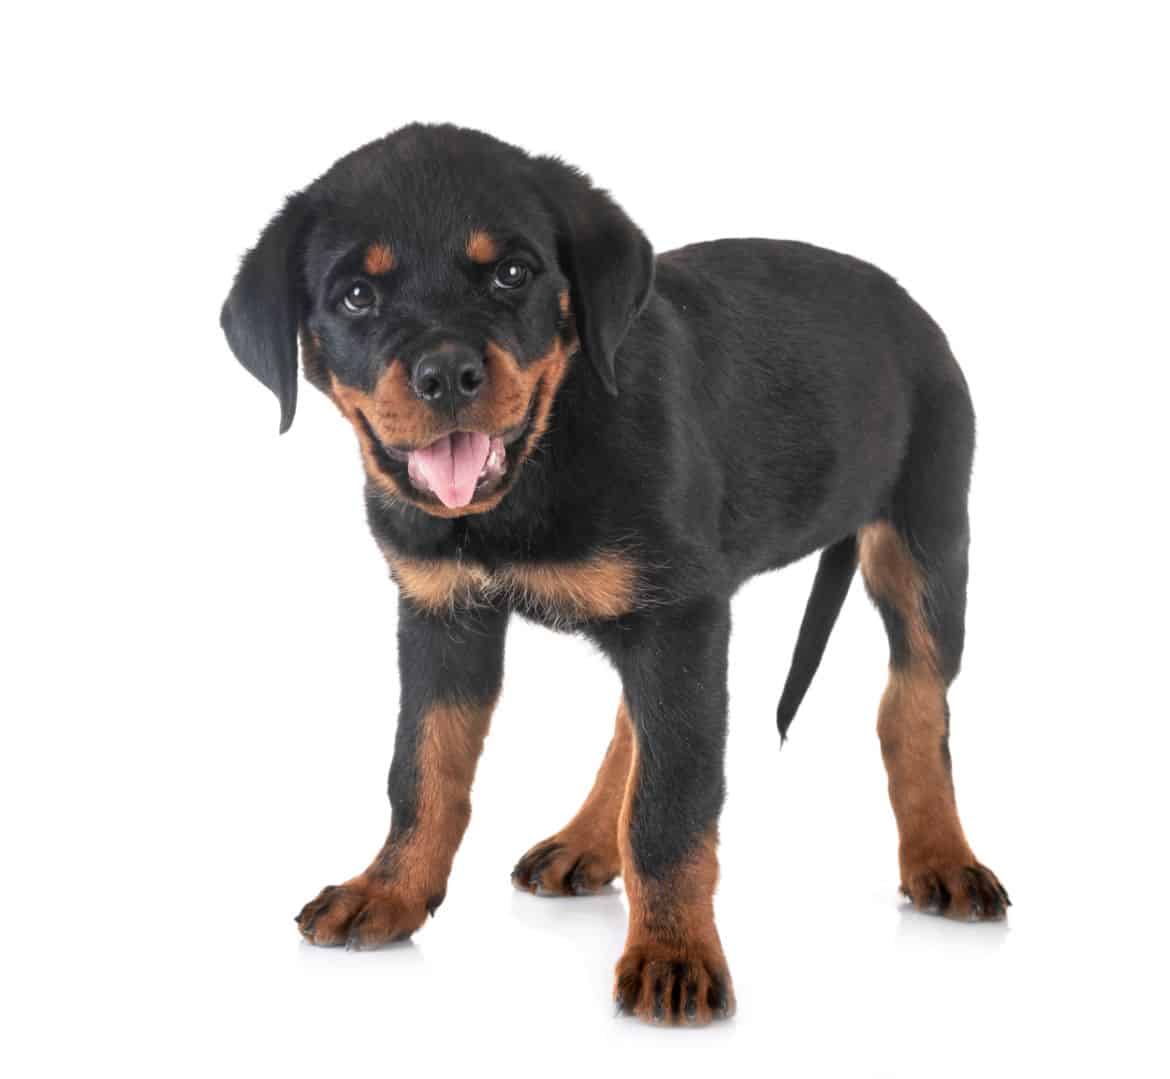 Why does my Rottweiler nibble on my cat?